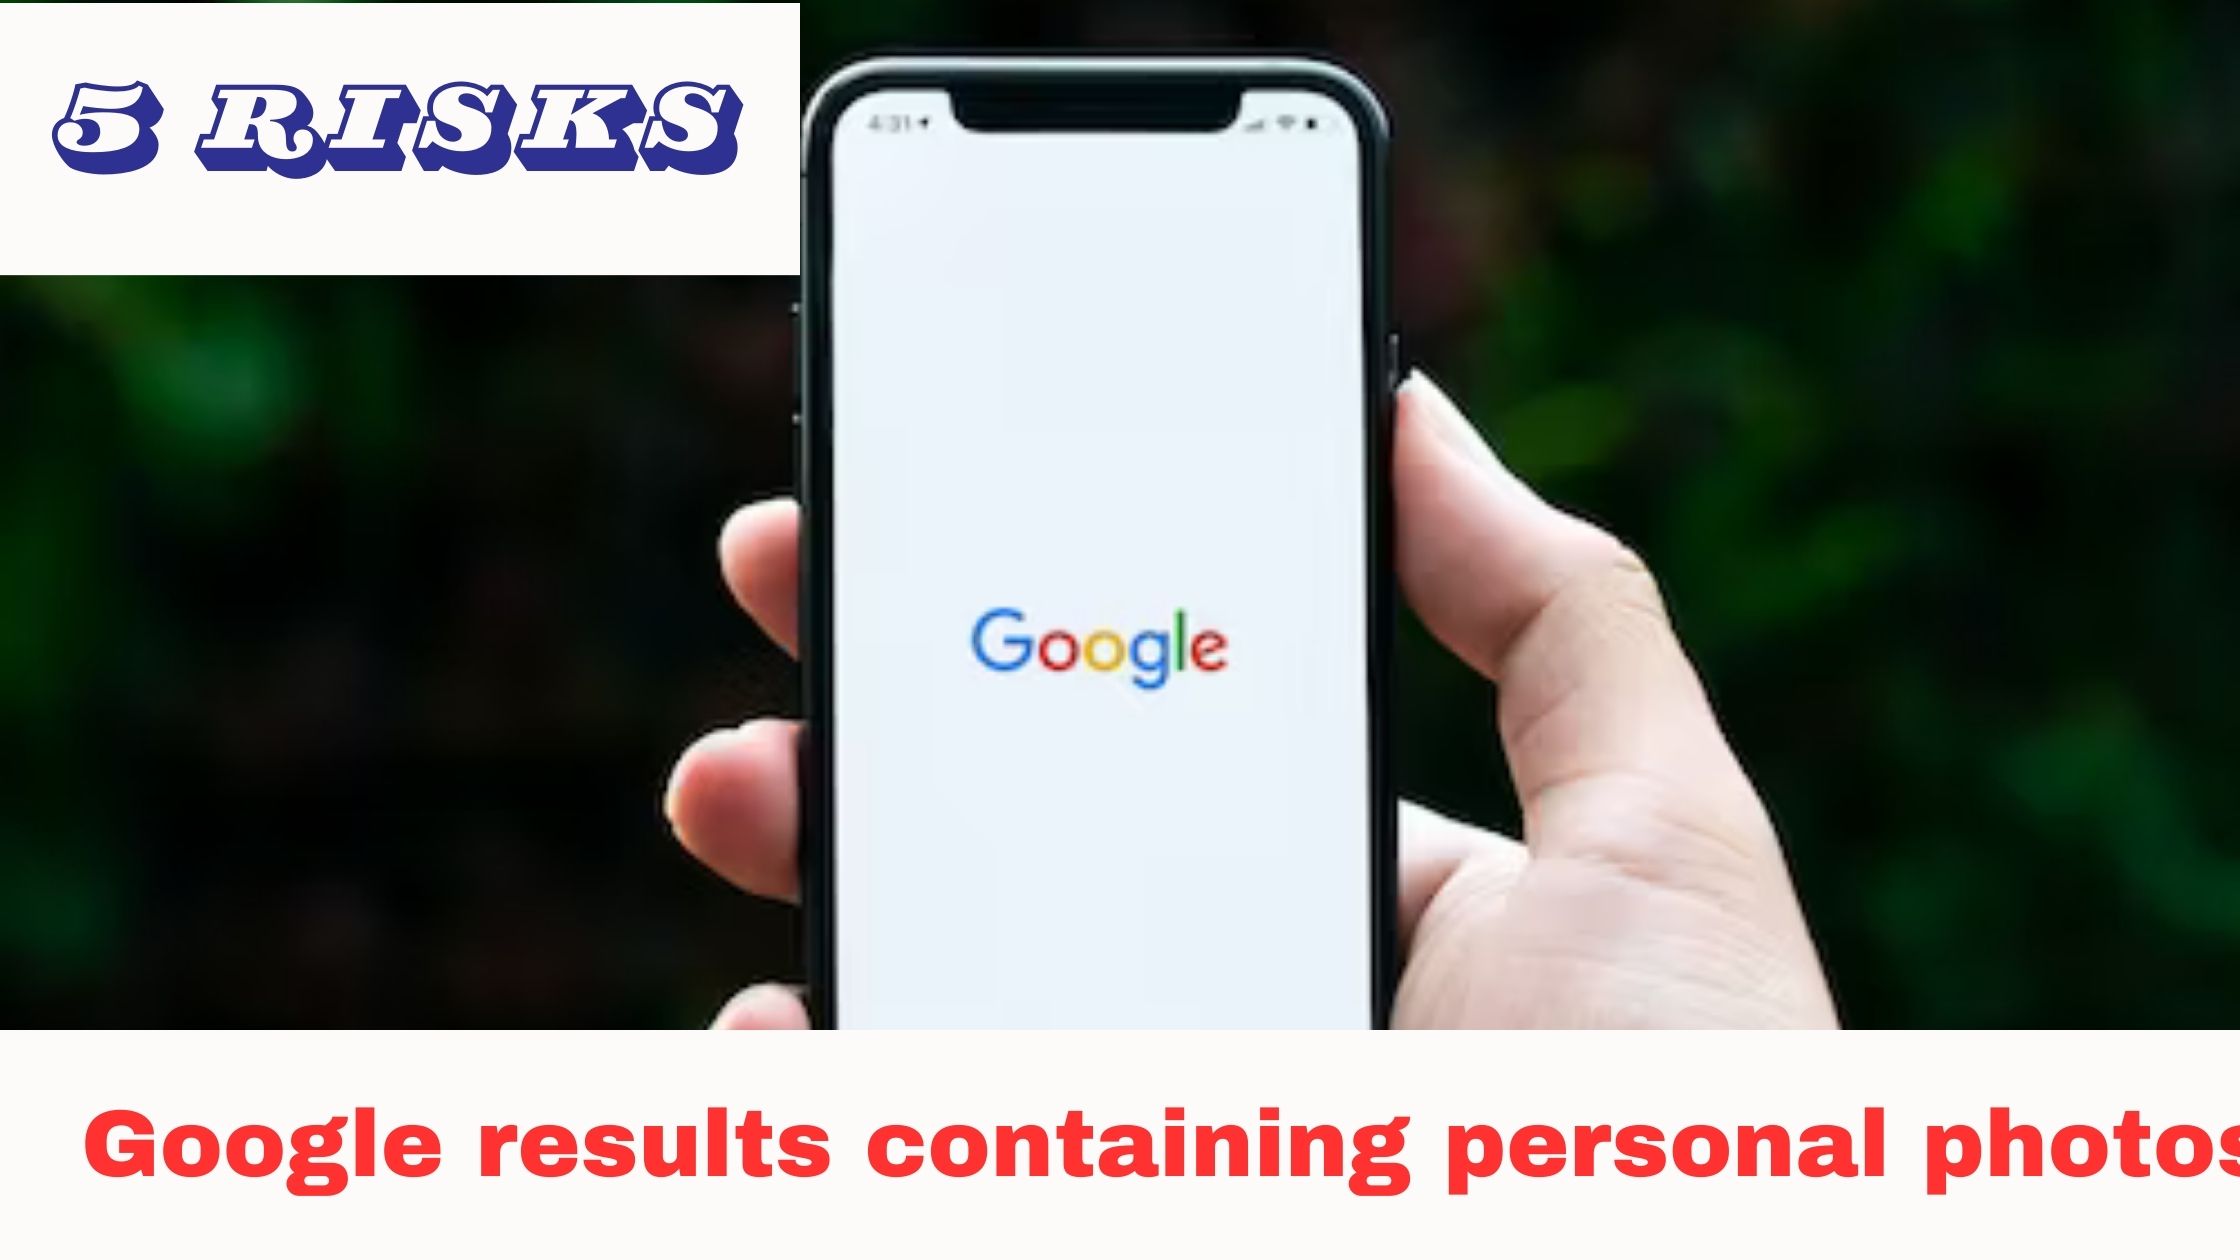 5 risks Google results containing personal photos